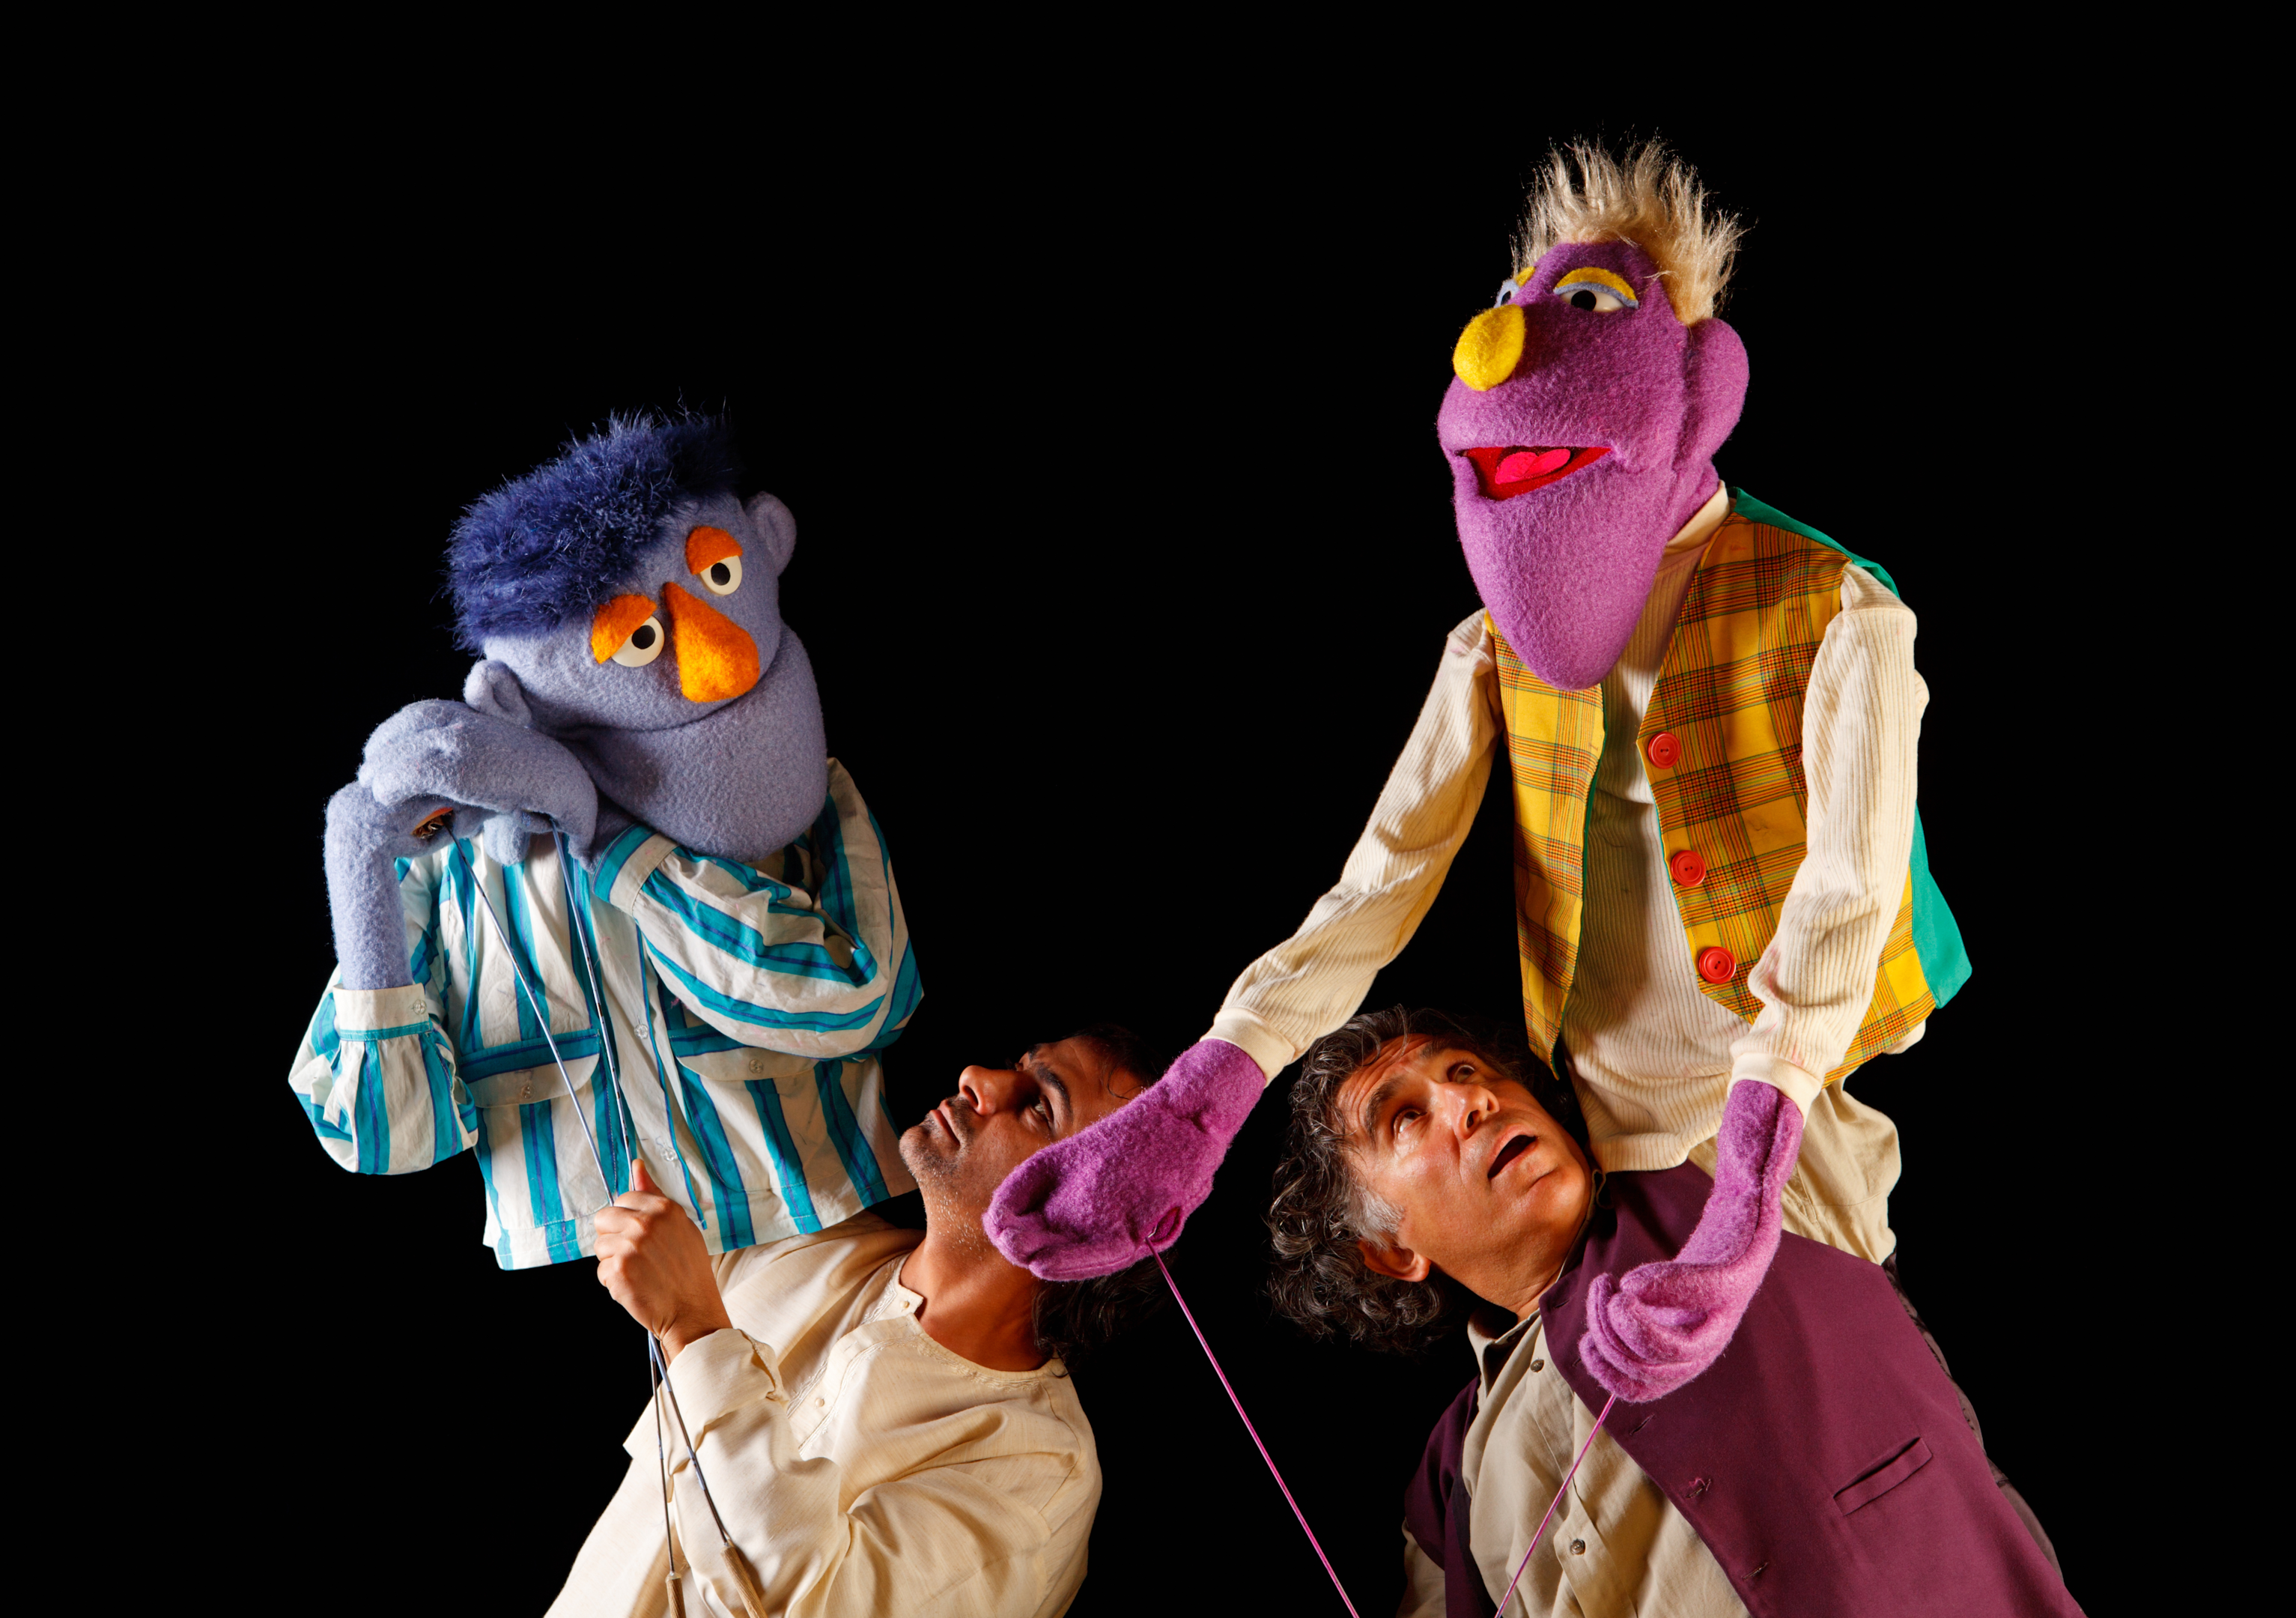 Puppeteers with their puppets on show